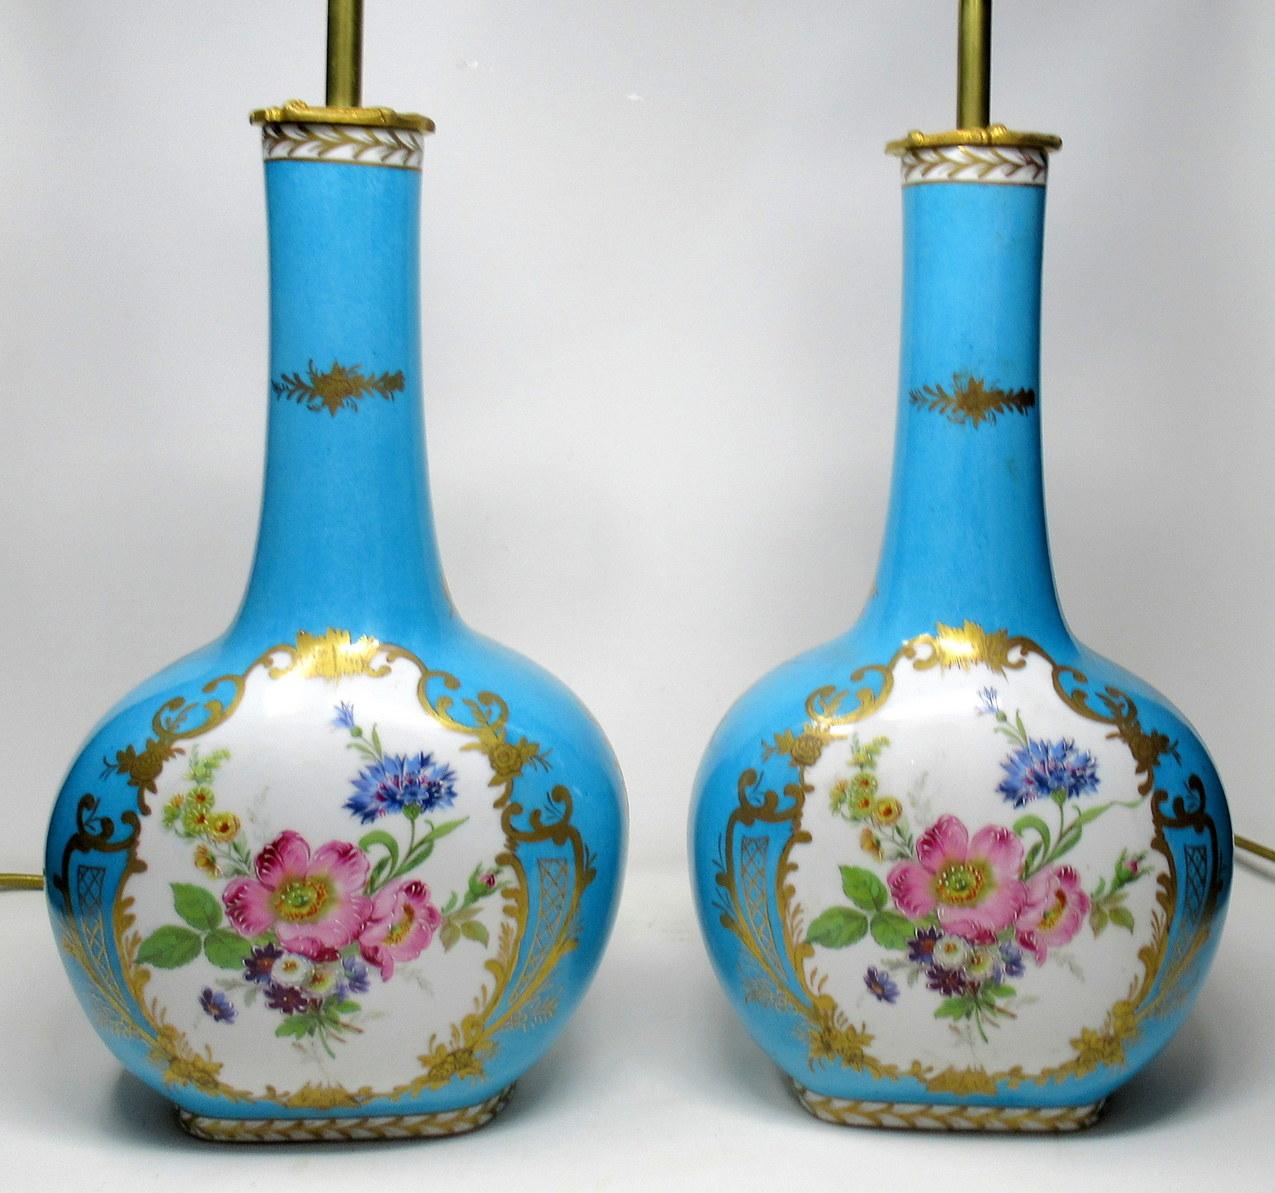 Stunning pair of French Sevres or Limoges style porcelain bottle vases now converted to electric table lamps of good size proportions.

First quarter of the 20th century.

The hand painted central reserves depicting summer flowers within ornate